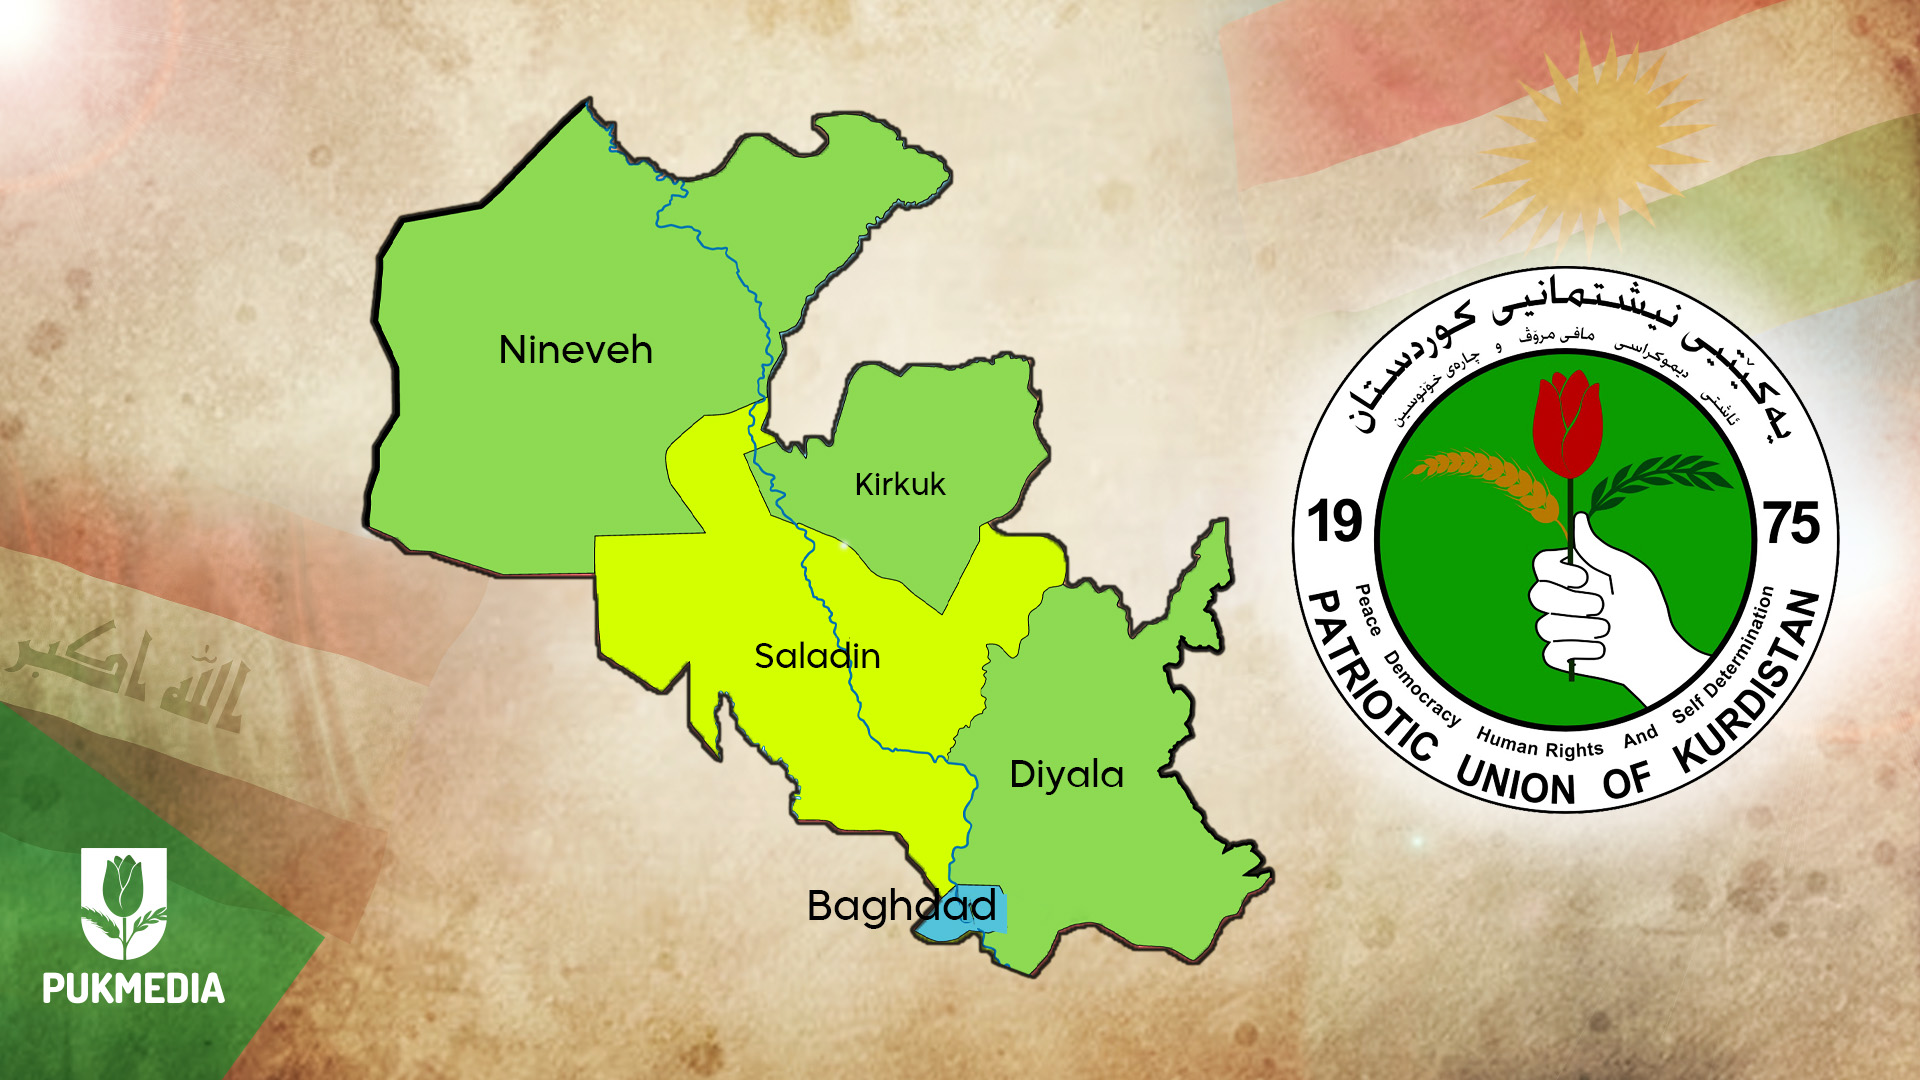  Regions where PUK has nominated candidates for Iraqi Provincial Councils Elections.